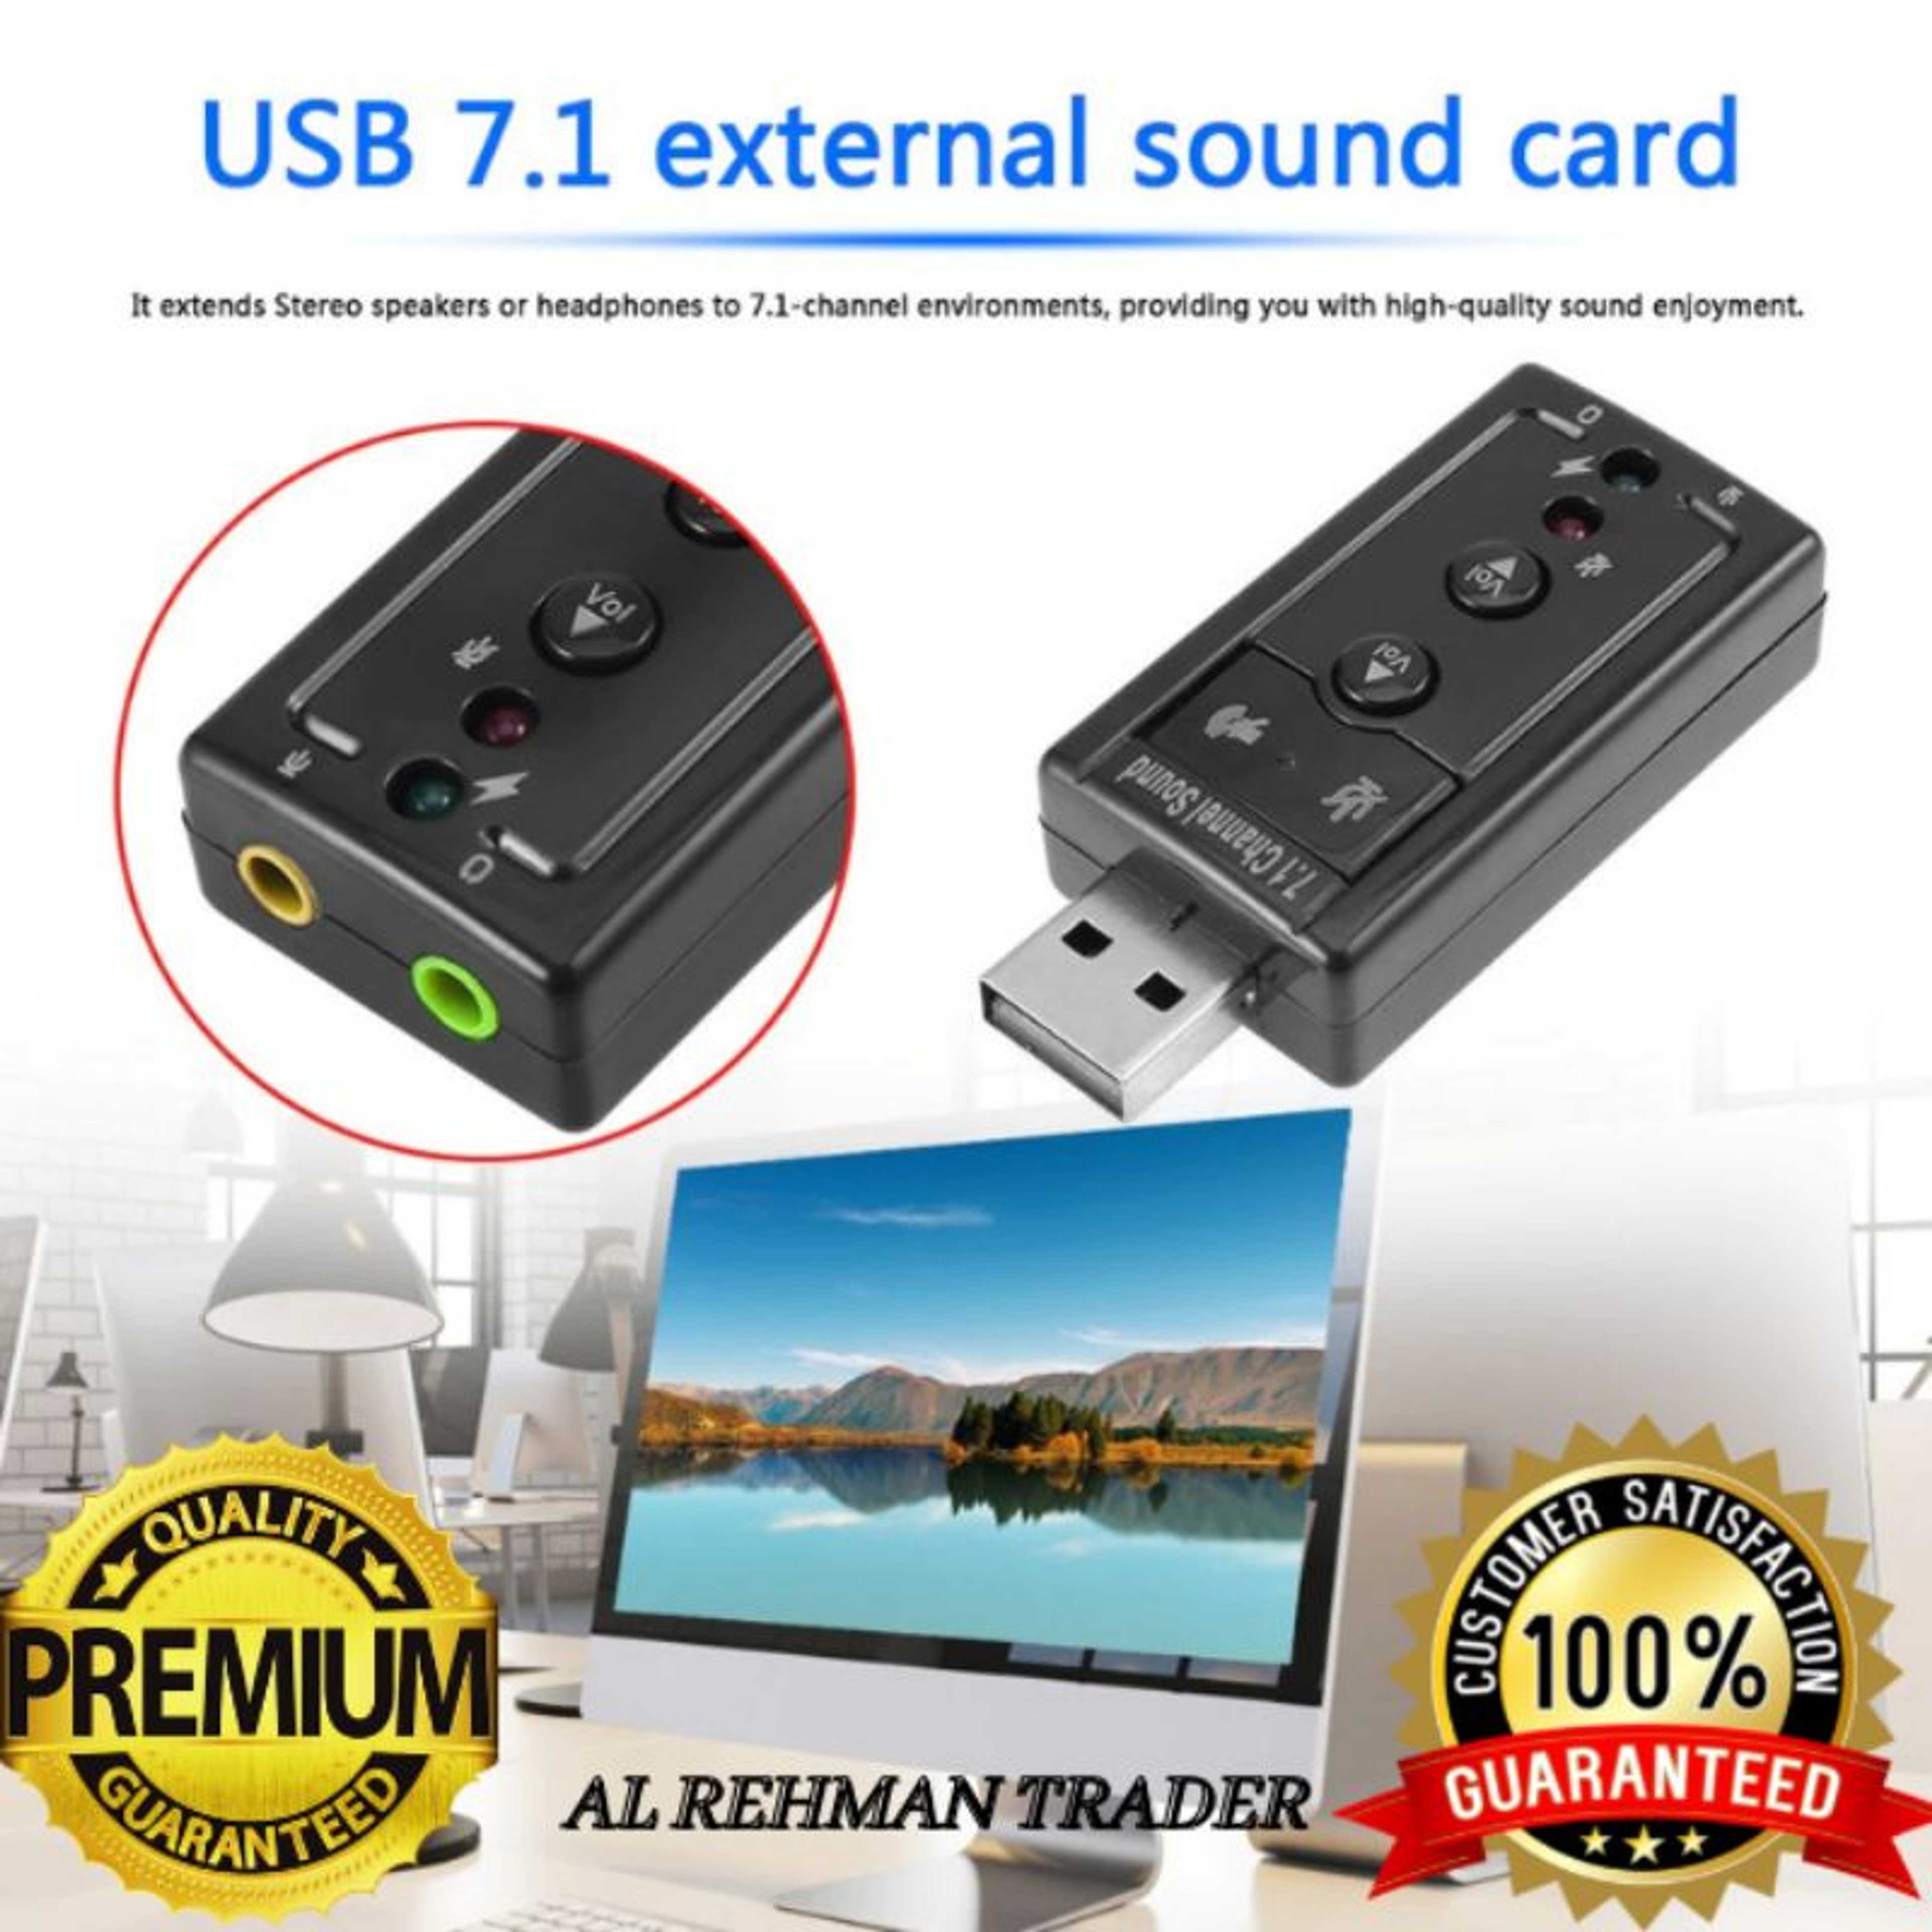 External USB Sound Card USB 2.0 Virtual 7.1 Channel Stereo 3.5mm Headphone Audio Adapter Microphone Sound Card